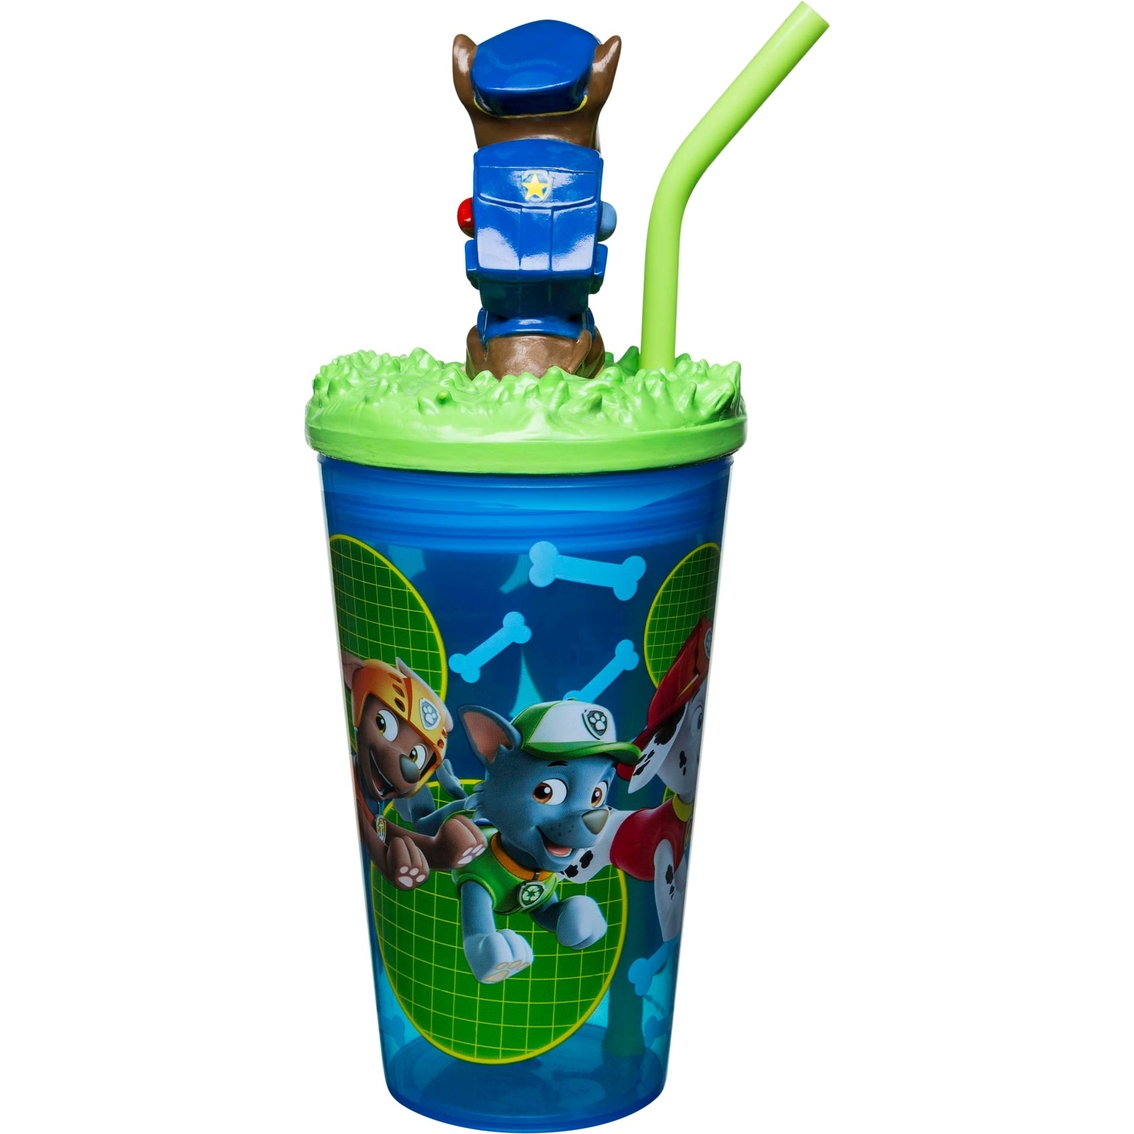 PAW PATROL 2PK Spill Proof Sippy POP-UP STRAW Cups Kids Drink Beverages  Tumbler